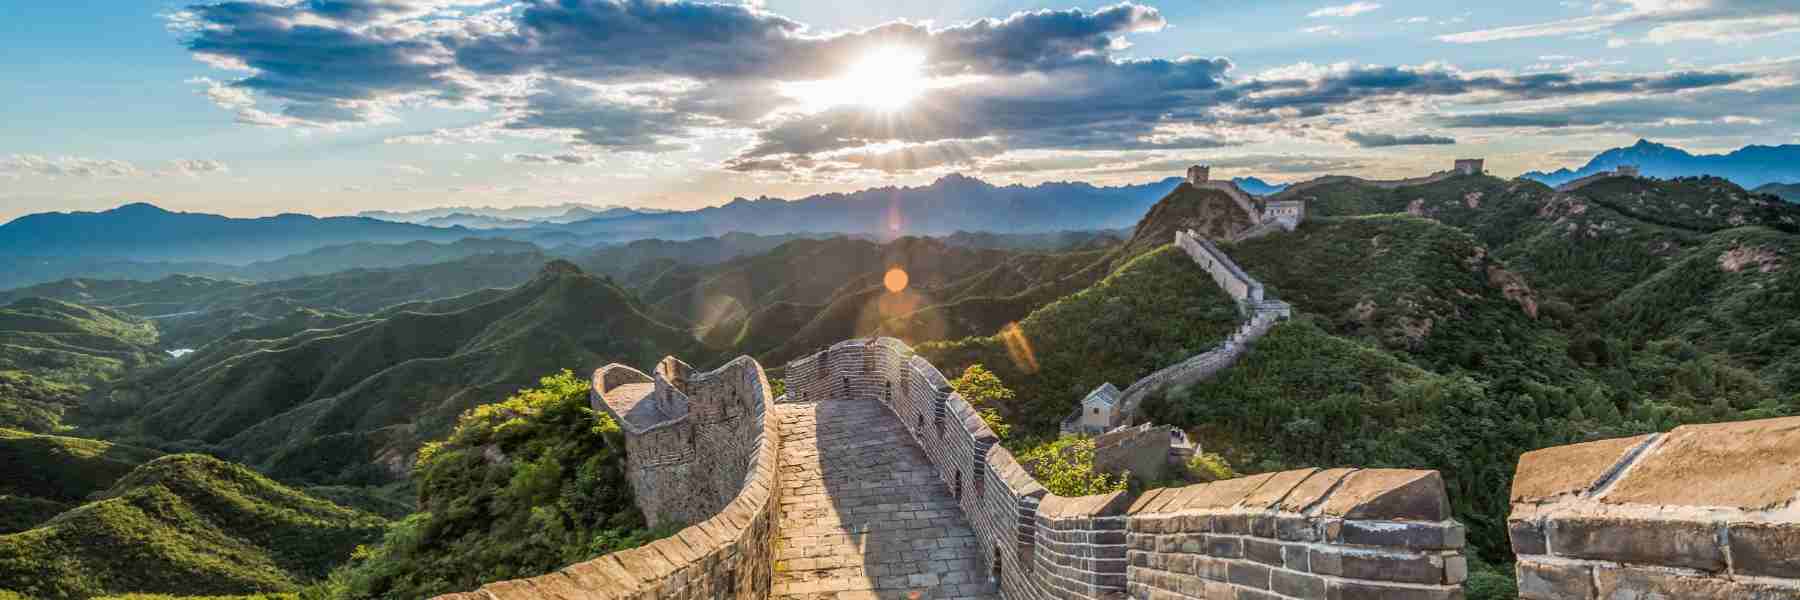 7-Day China Private Tour of Hong Kong, Shanghai and Beijing